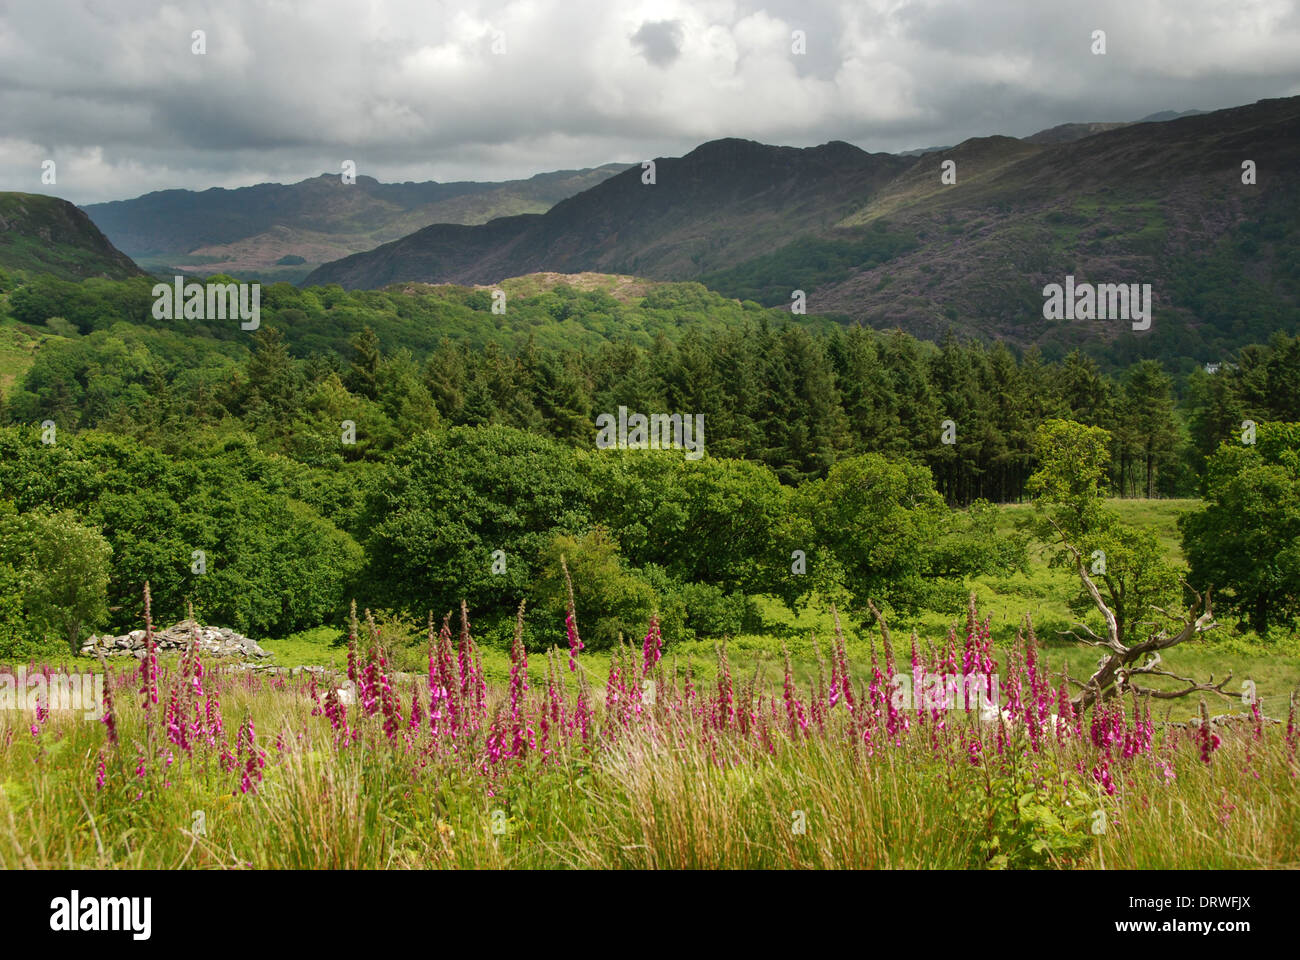 North Wales landscape in Snowdonia National Park, with foxgloves growing in the foreground Stock Photo